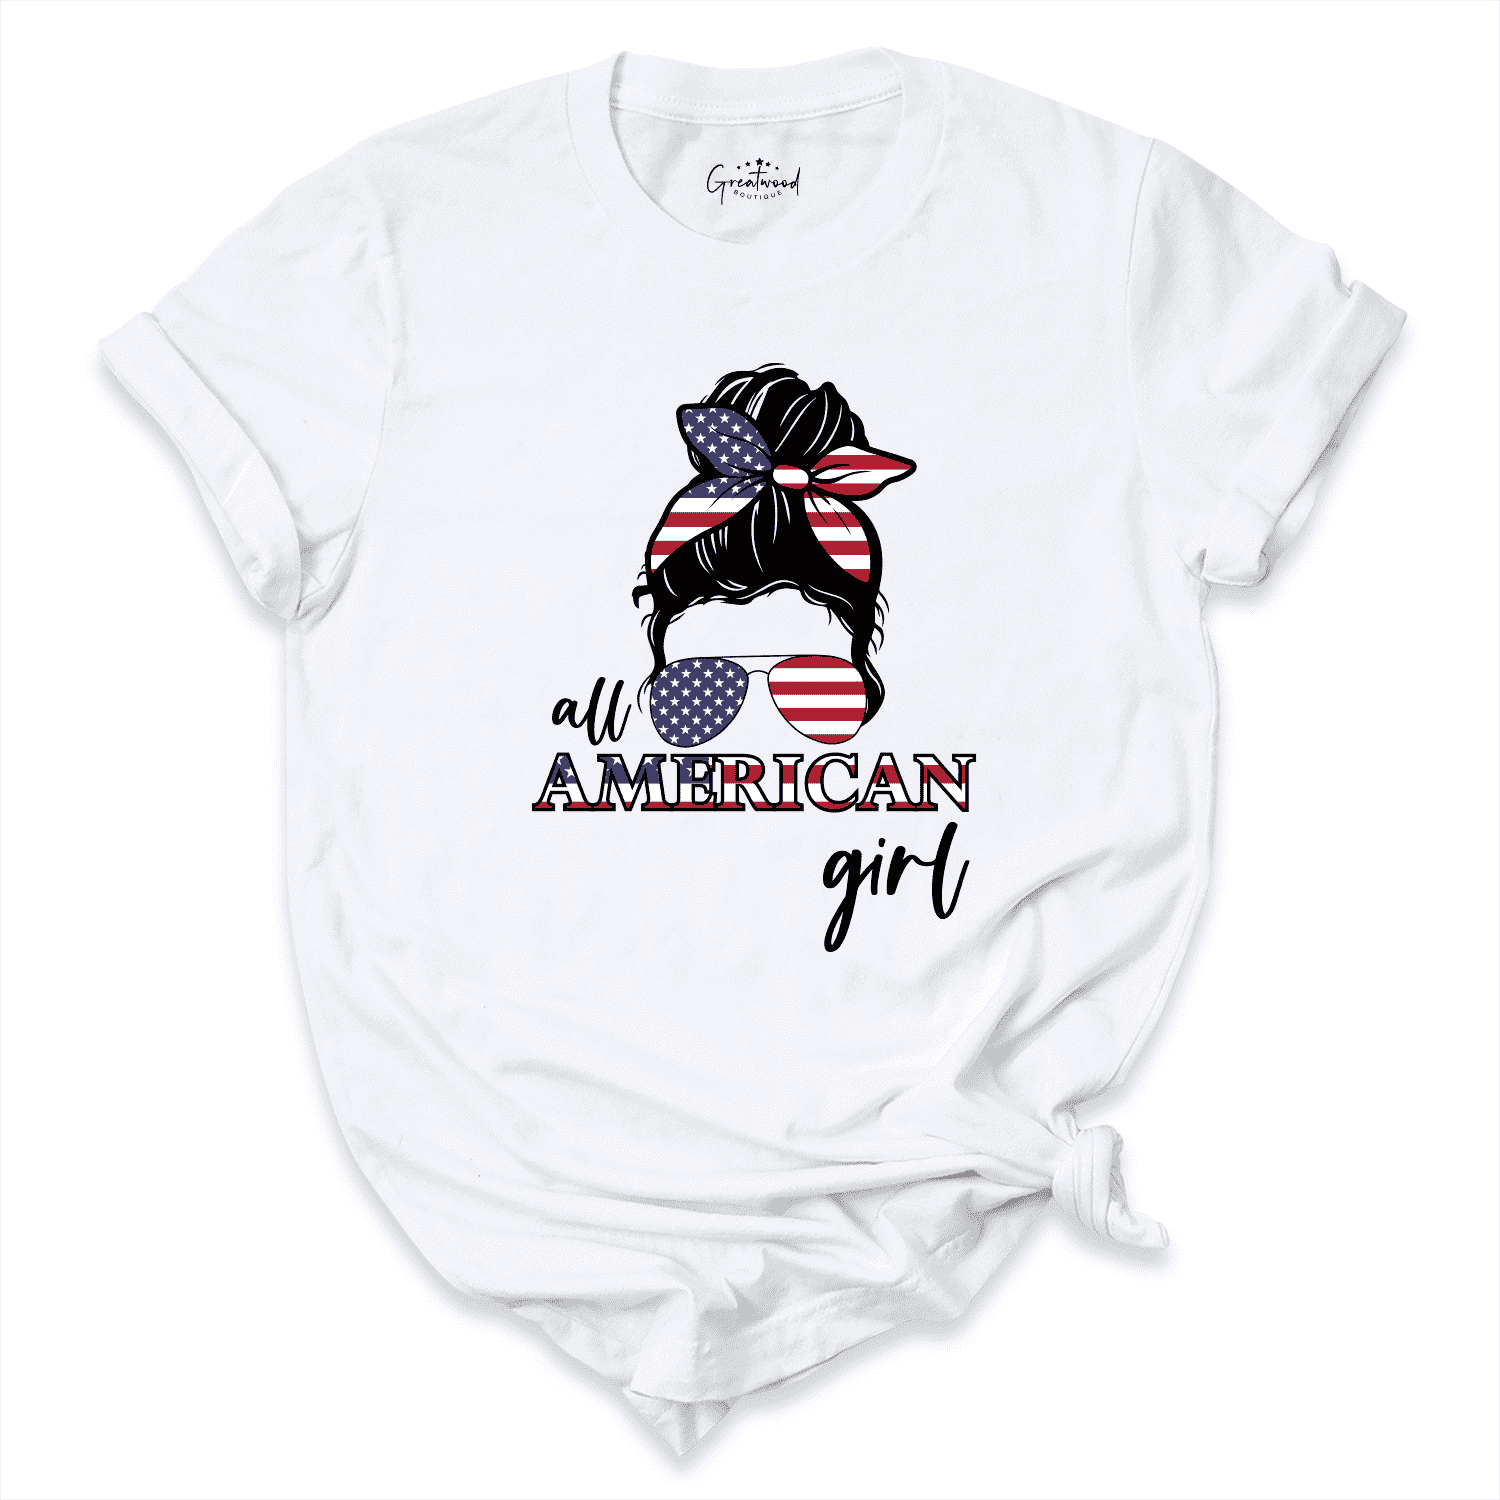 All American Family Shirt White - Greatwood Boutique